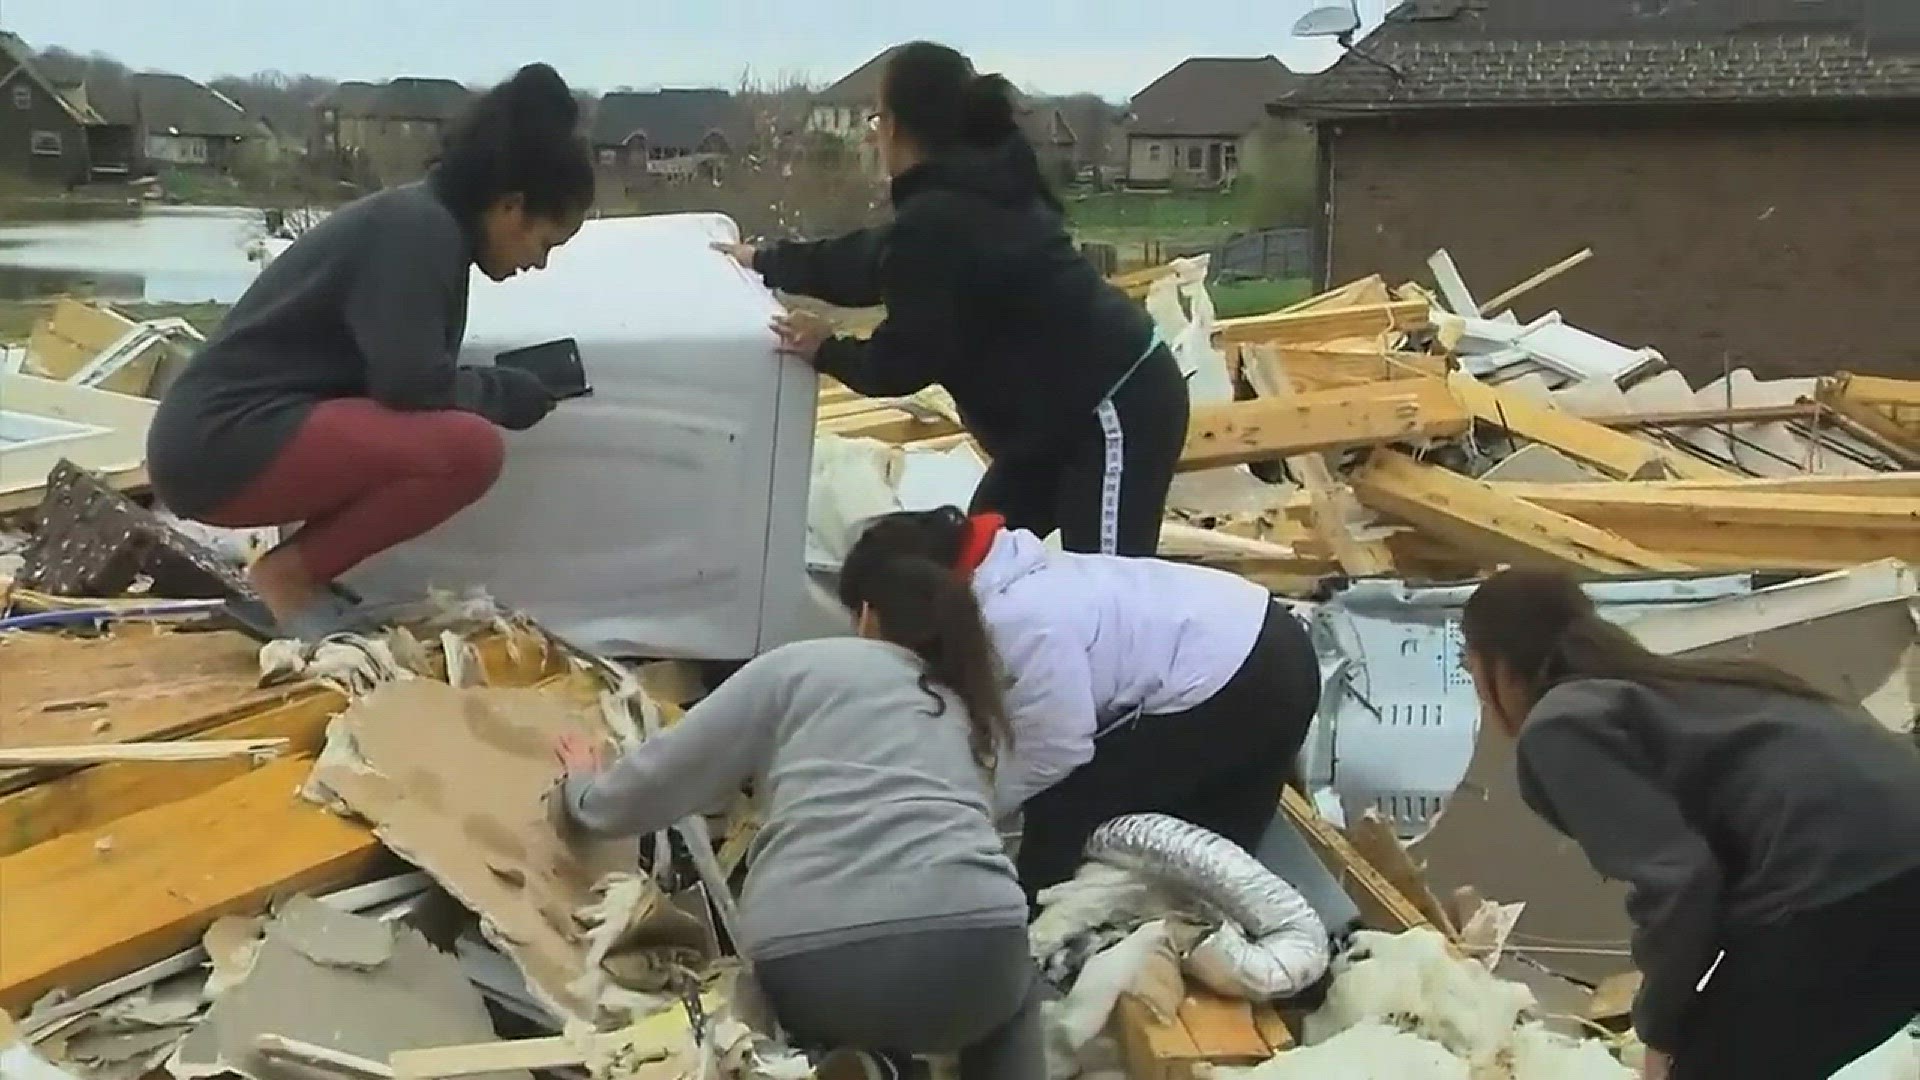 A tornado destroyed a Clarksville family's home with their dogs and a cat inside. Their neighbors helped them search the rubble for their pets. WSMV video